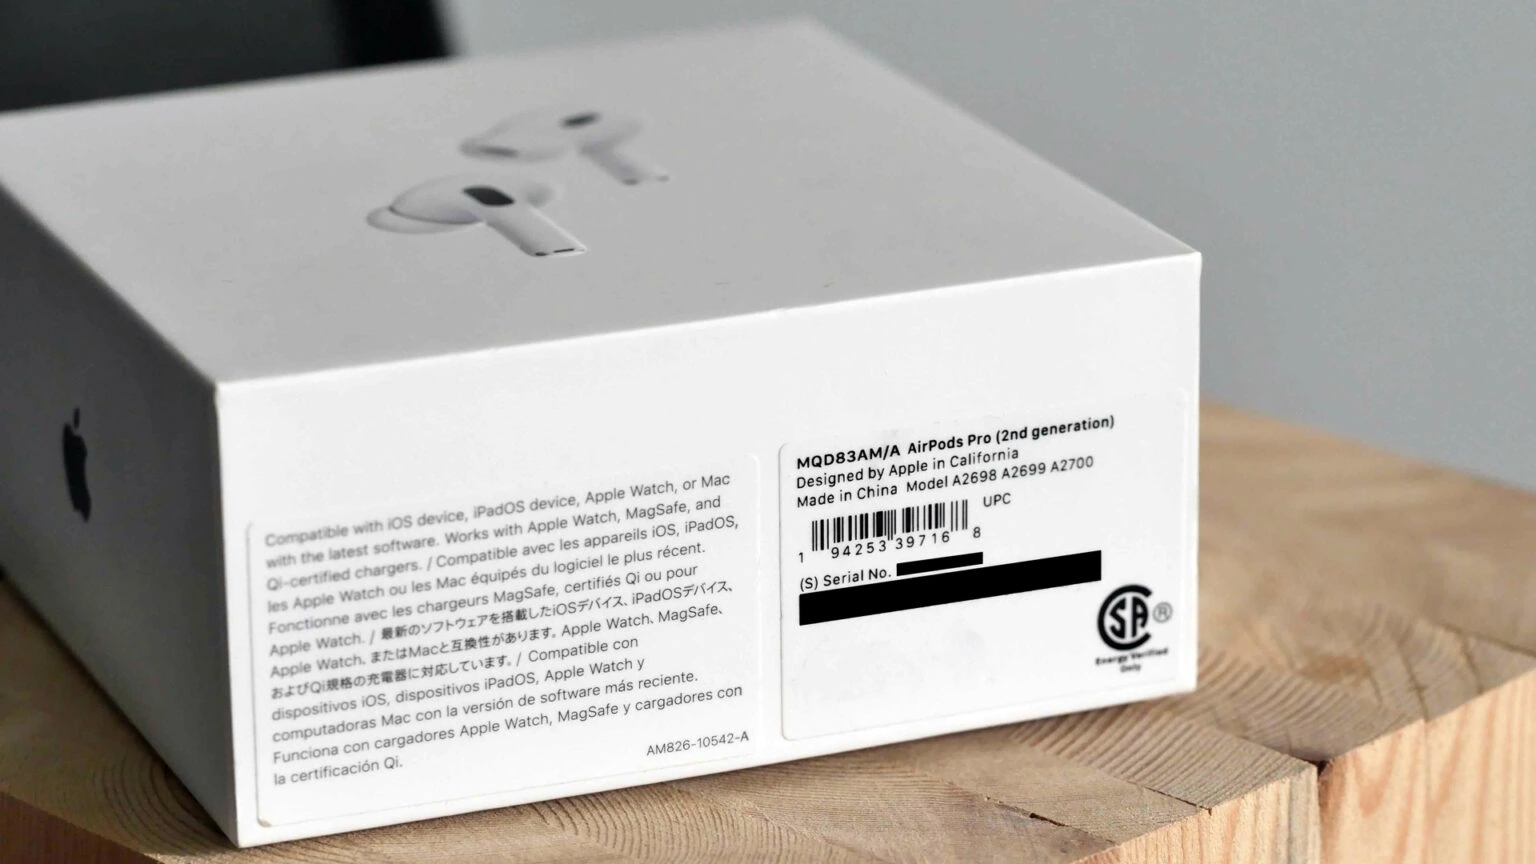 AirPods serial number in box